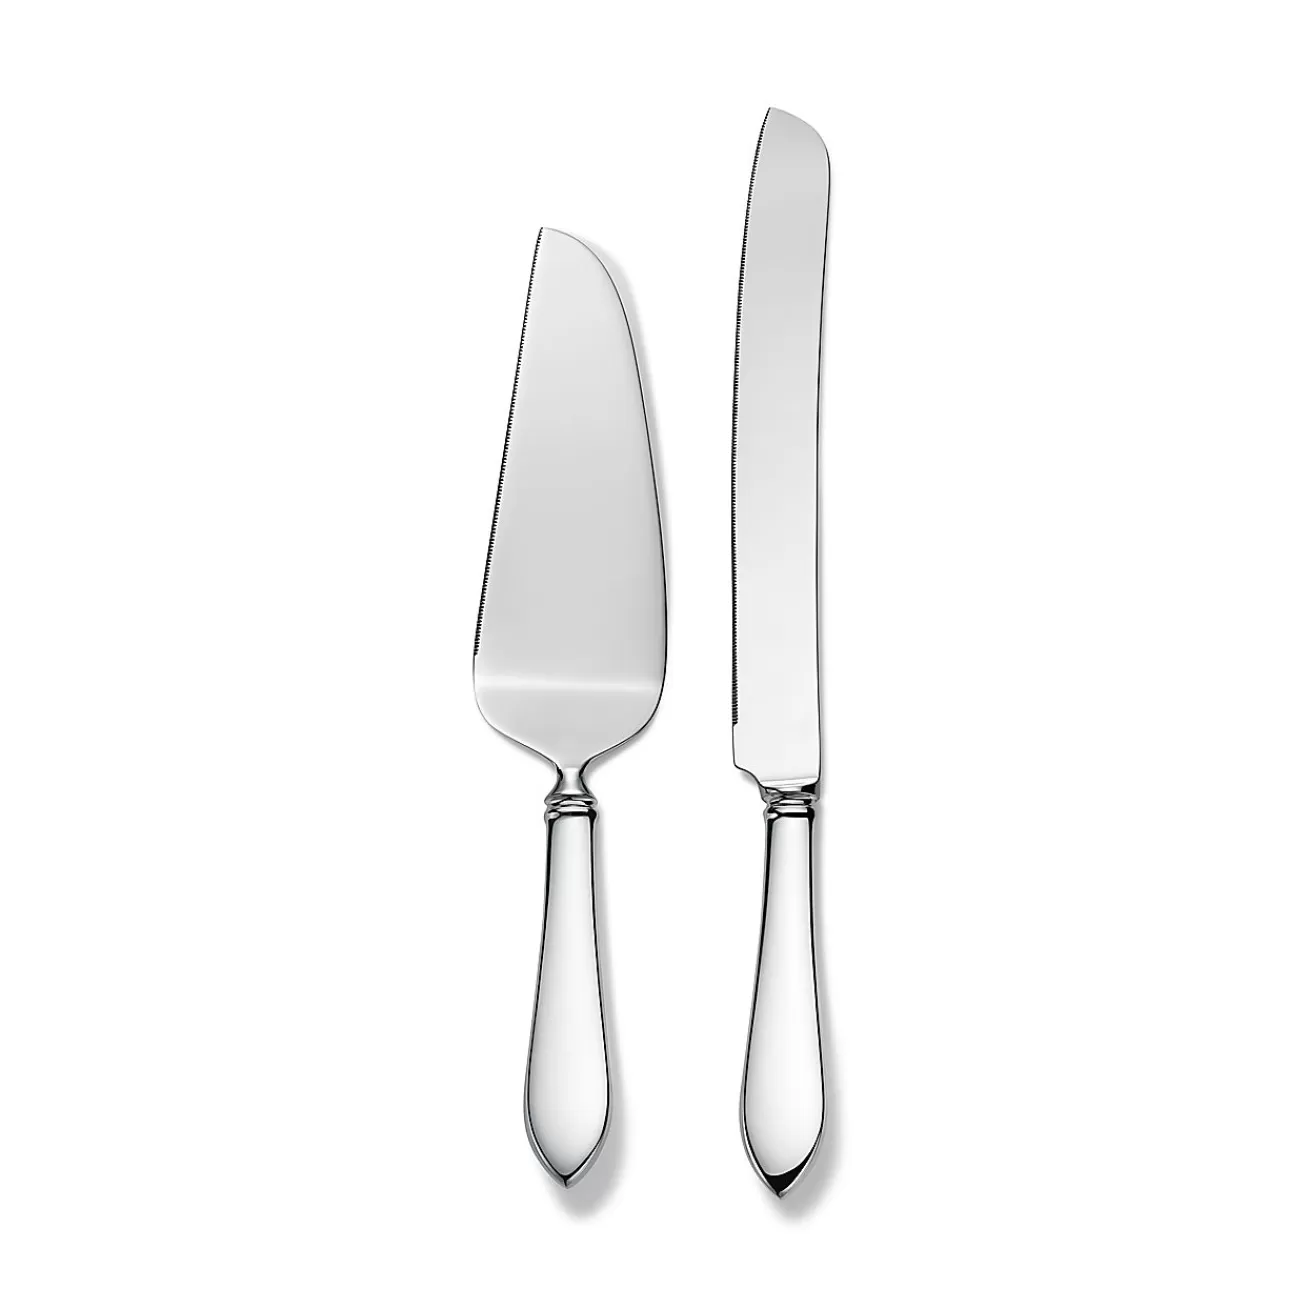 Tiffany & Co. Faneuil cake knife and server in sterling silver. | ^ Tableware | Flatware & Trays